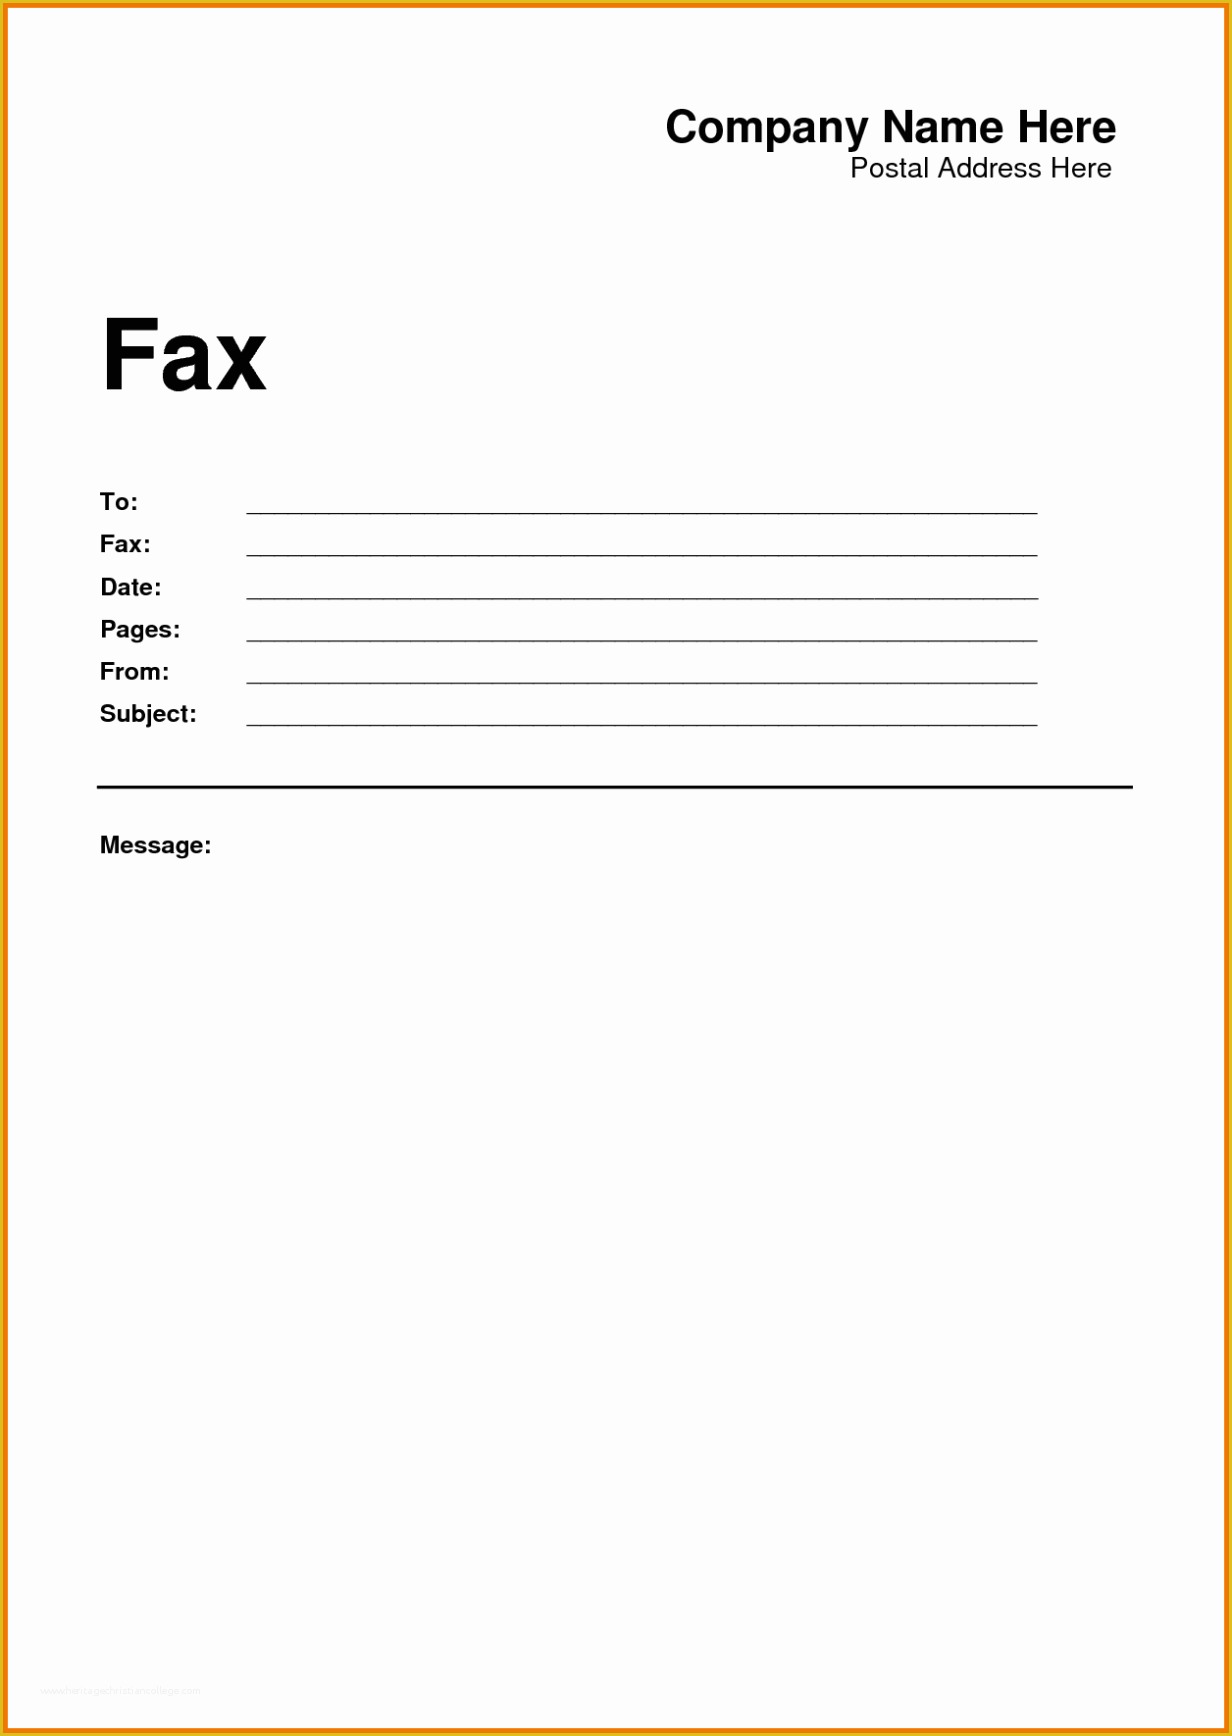 Fax Template Free Of Personal Fax Cover Sheet Kayskehauk